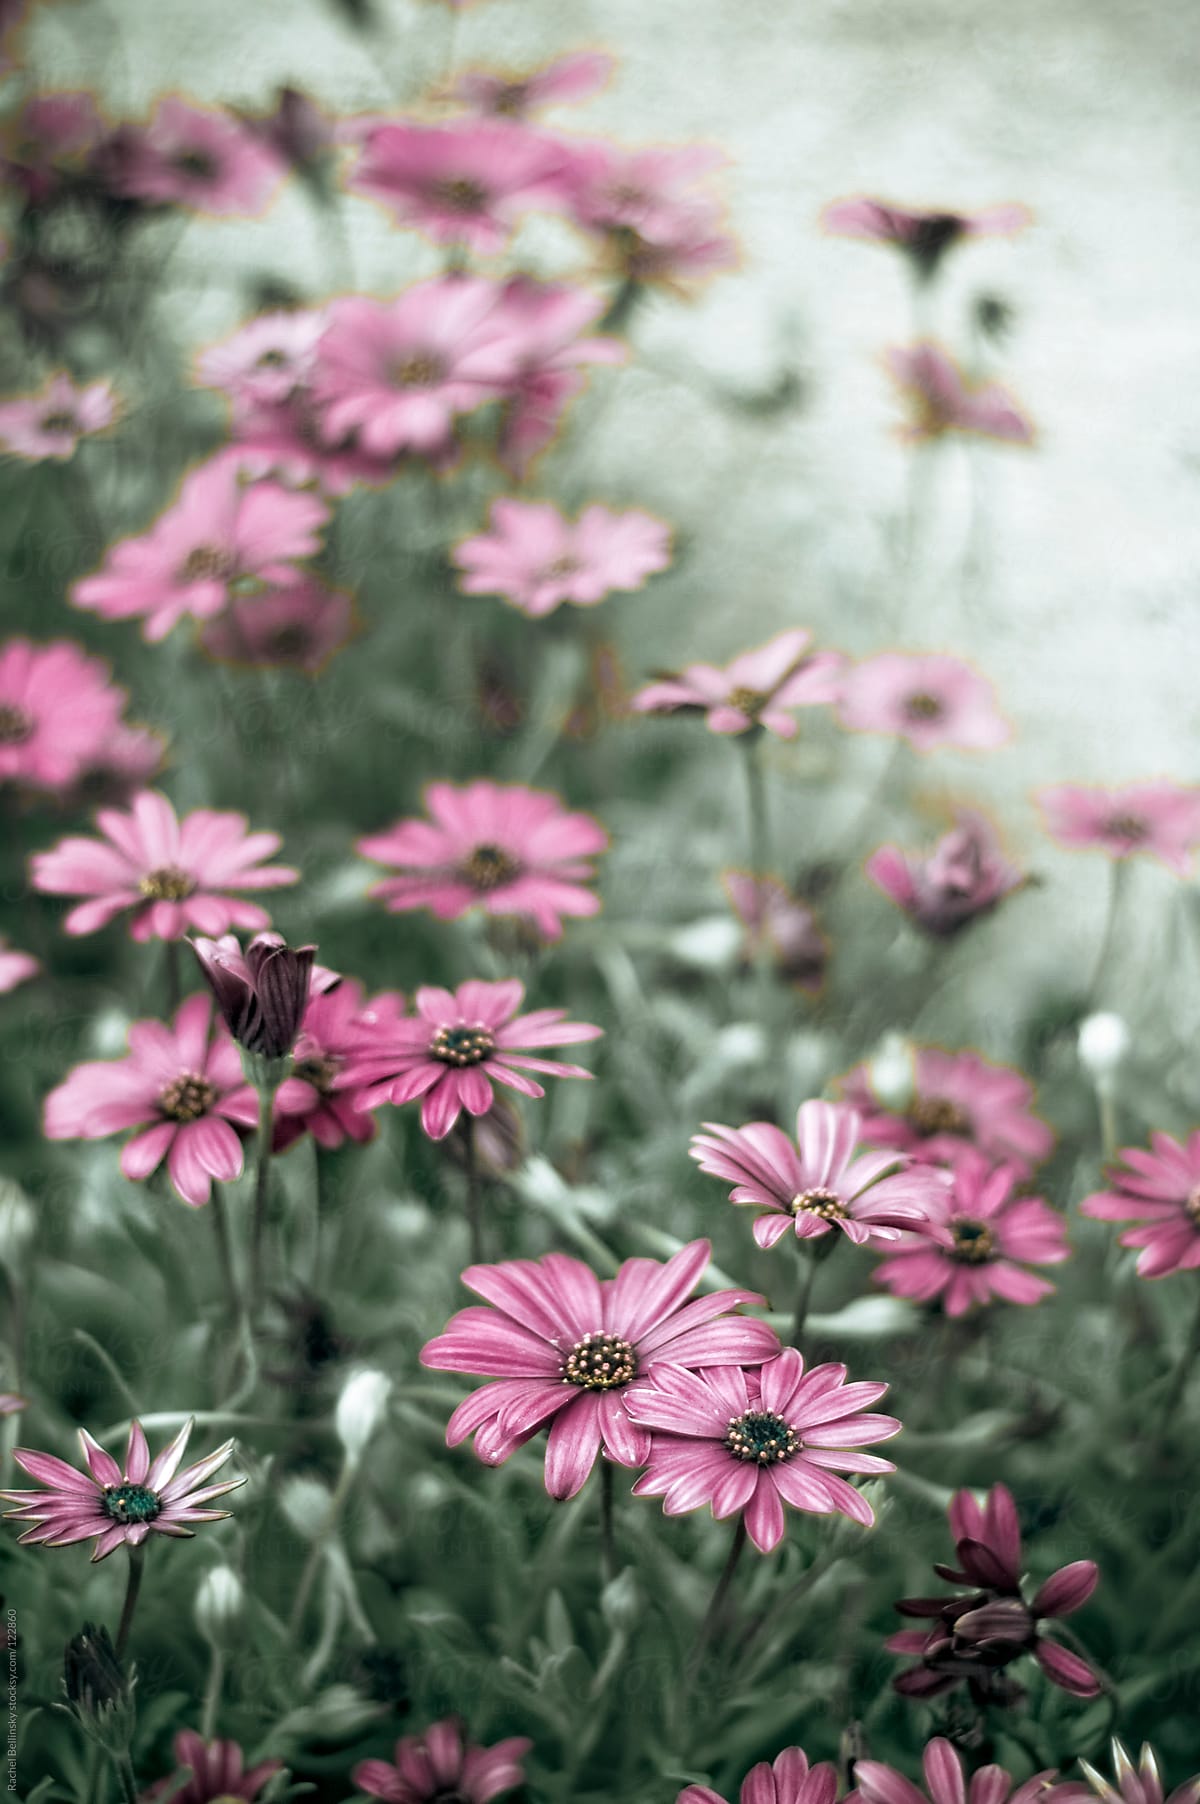 Magenta daisies in green grass fading into a pale distance